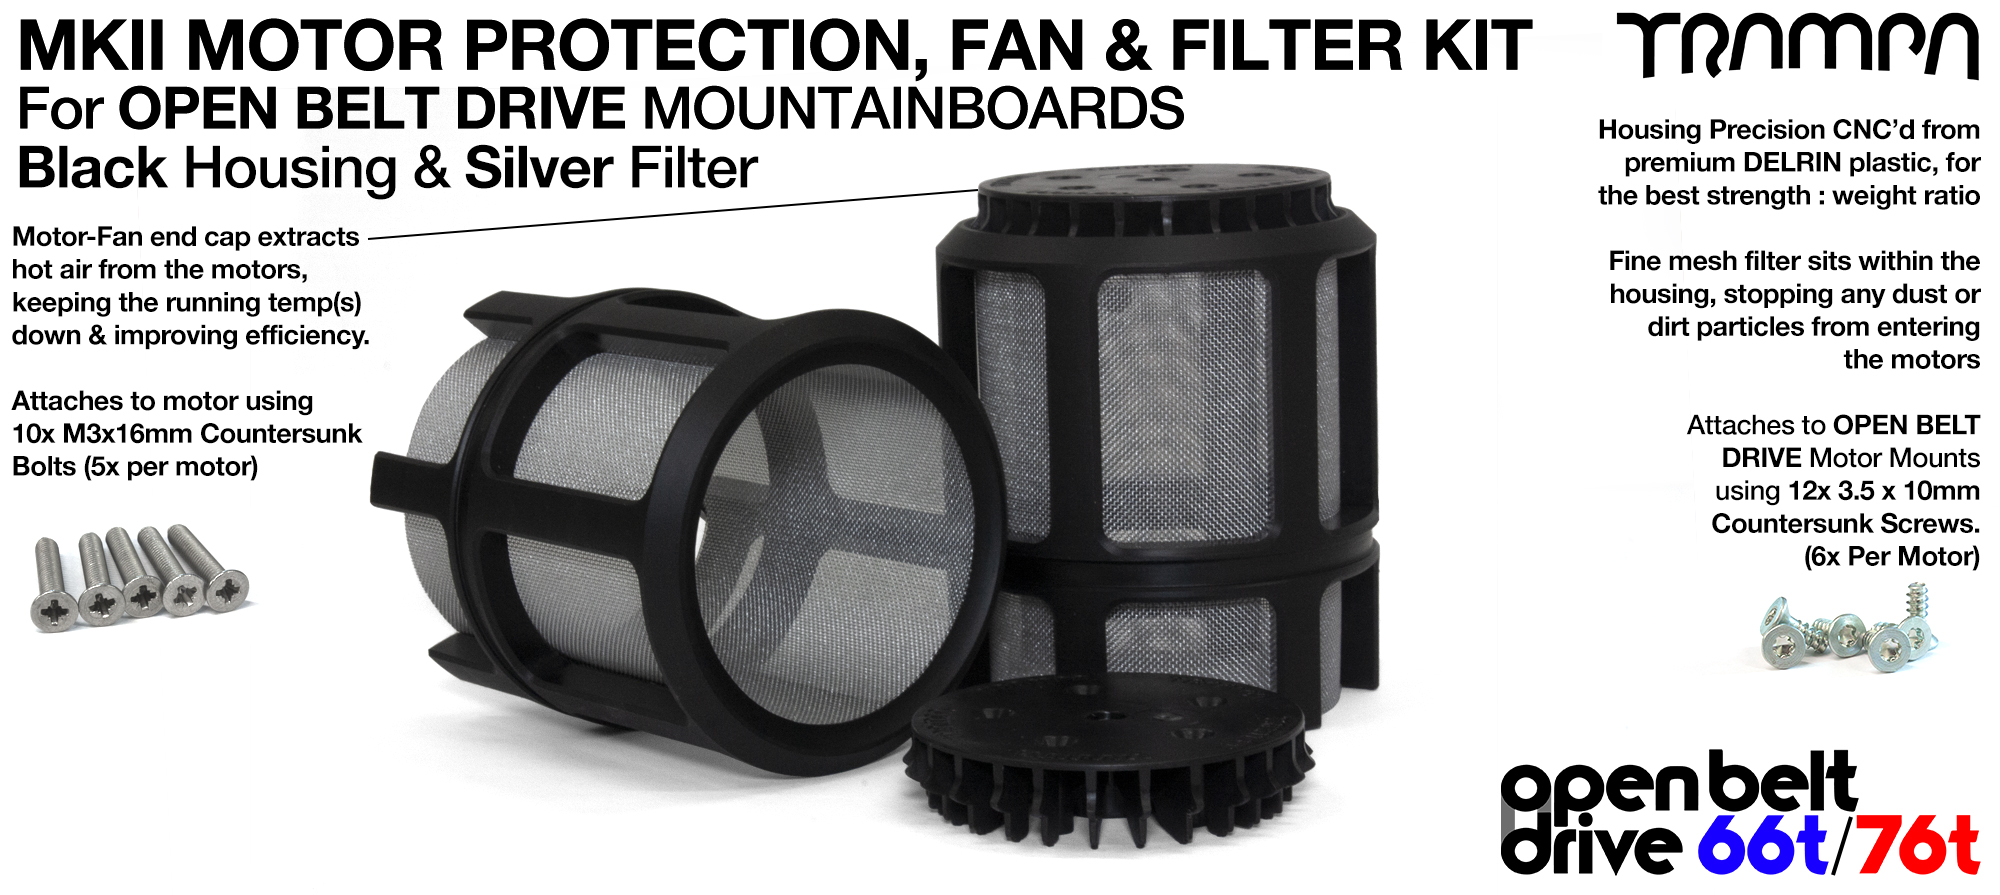 FULL CAGE Motor protection SUPER STRONG DELRIN Plastic includes Fan & SILVER Filter - TWIN